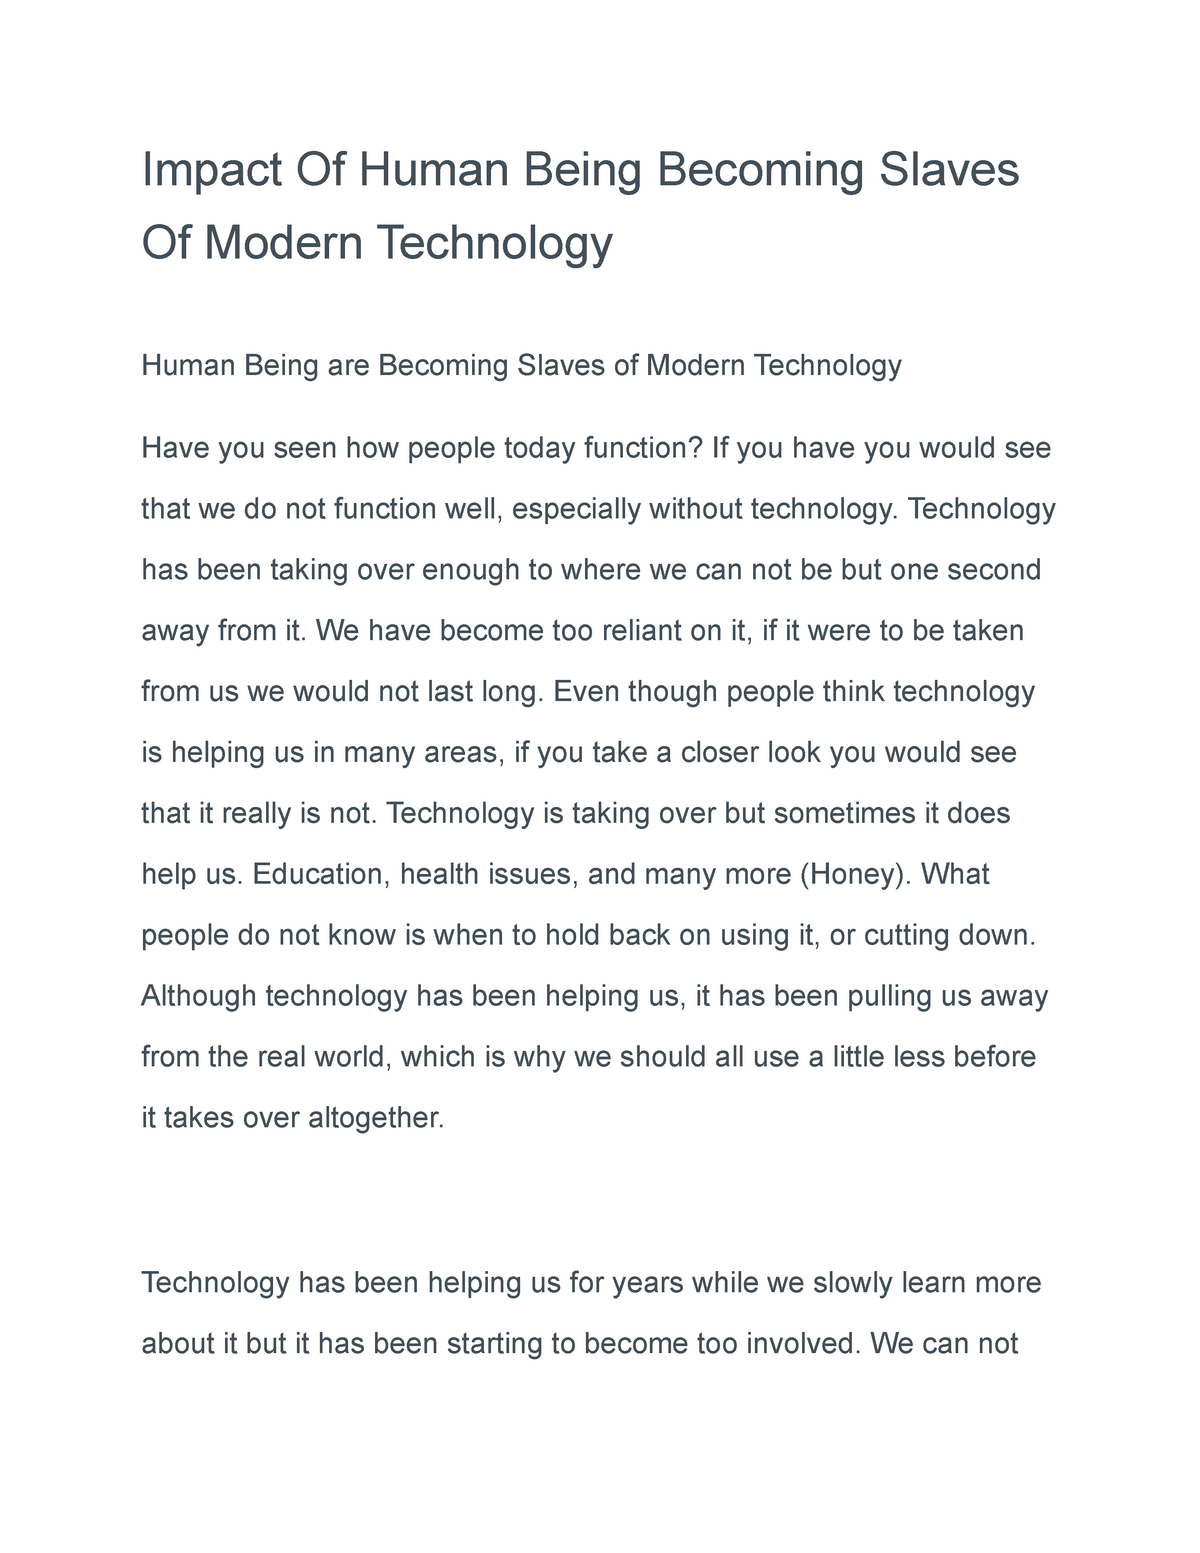 essay about human being are becoming slaves of modern technology